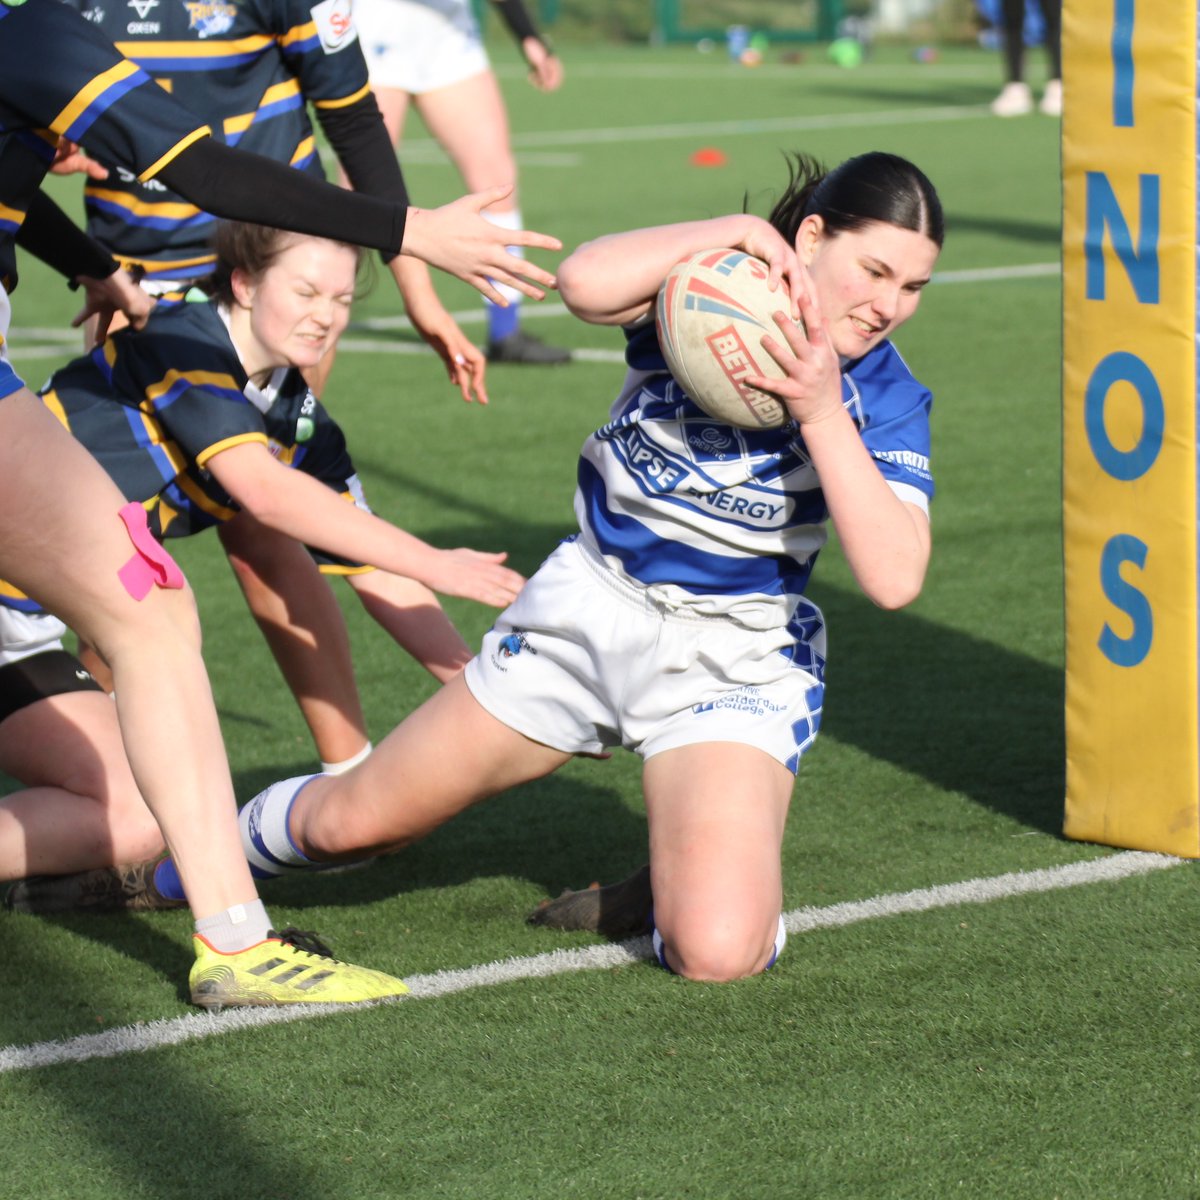 Our Women’s Rugby Academy team have reached the finals in the College Rugby League! What an achievement to reach the final for the second year running 🏈 @HalifaxPanthers Academy will be playing against @LeedsRhinos today. Good luck!🤩 @CC_SAcademies